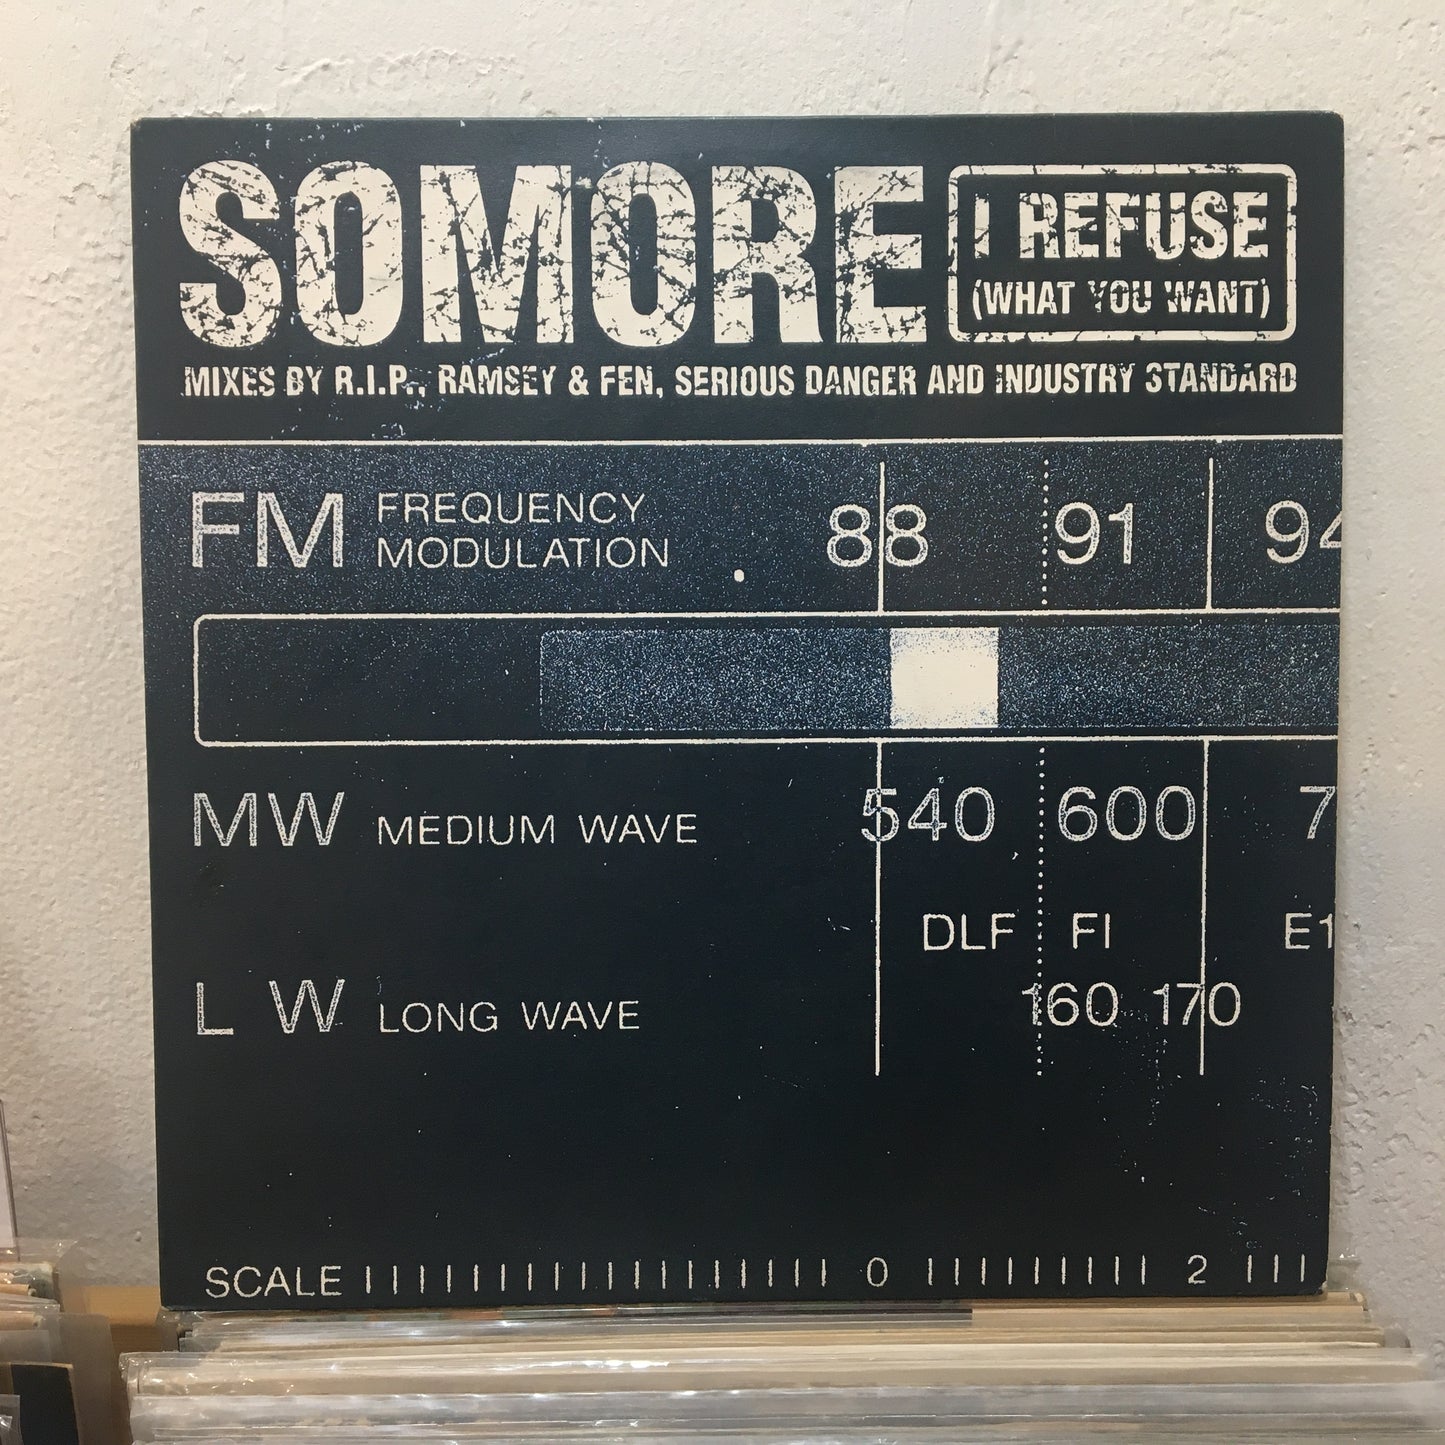 Somore Featuring Damon Trueitt- I Refuse (What You Want)